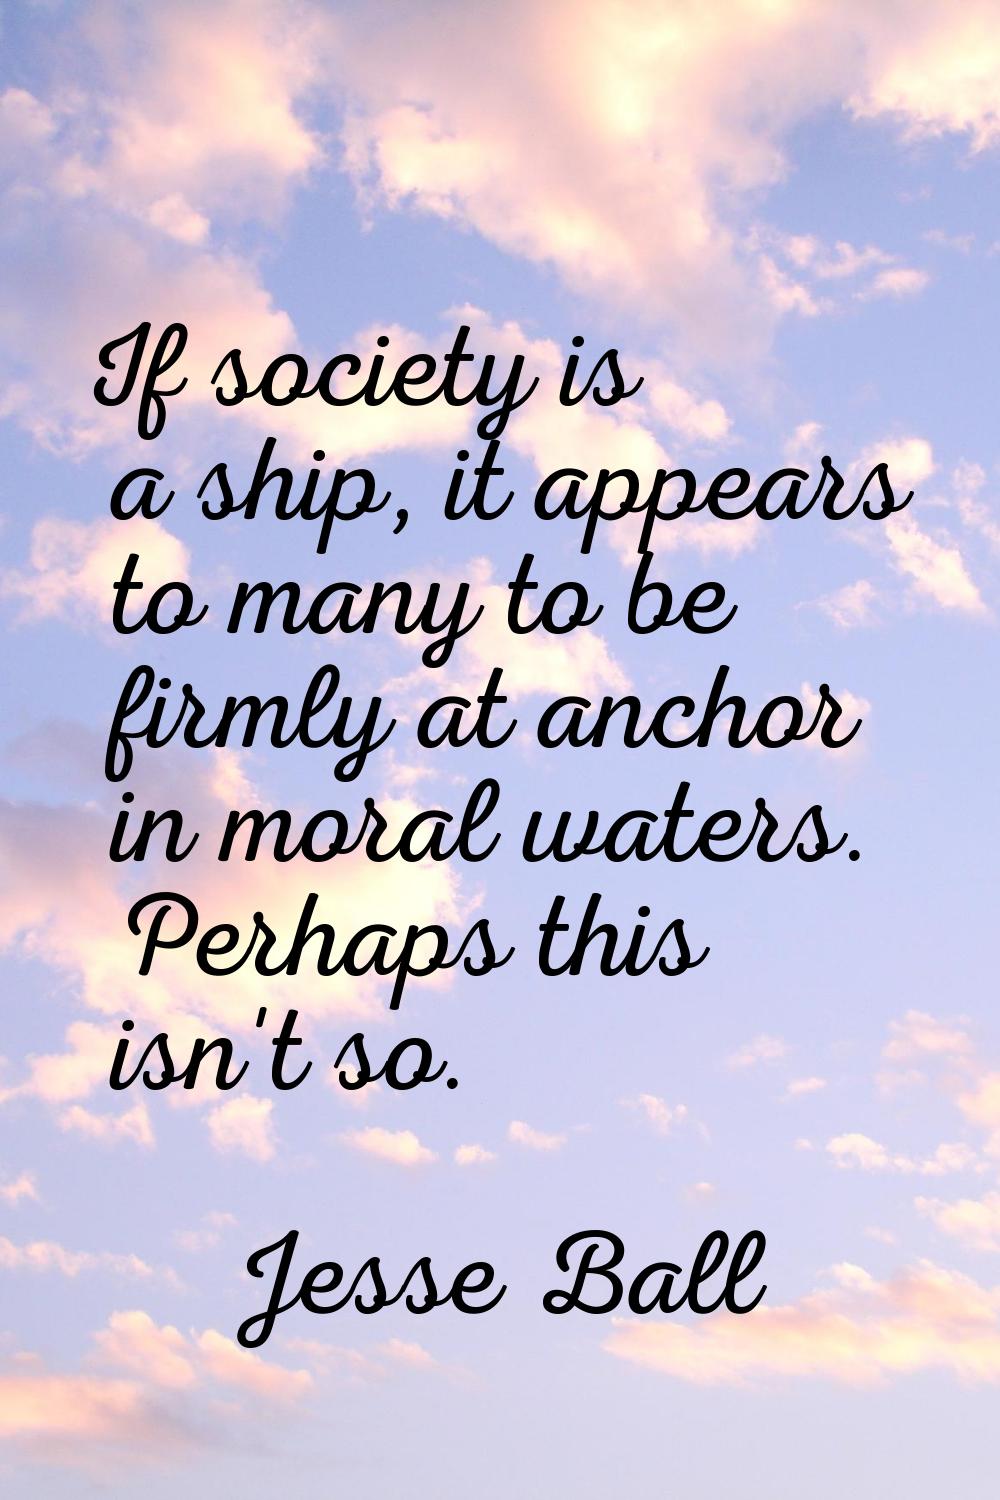 If society is a ship, it appears to many to be firmly at anchor in moral waters. Perhaps this isn't